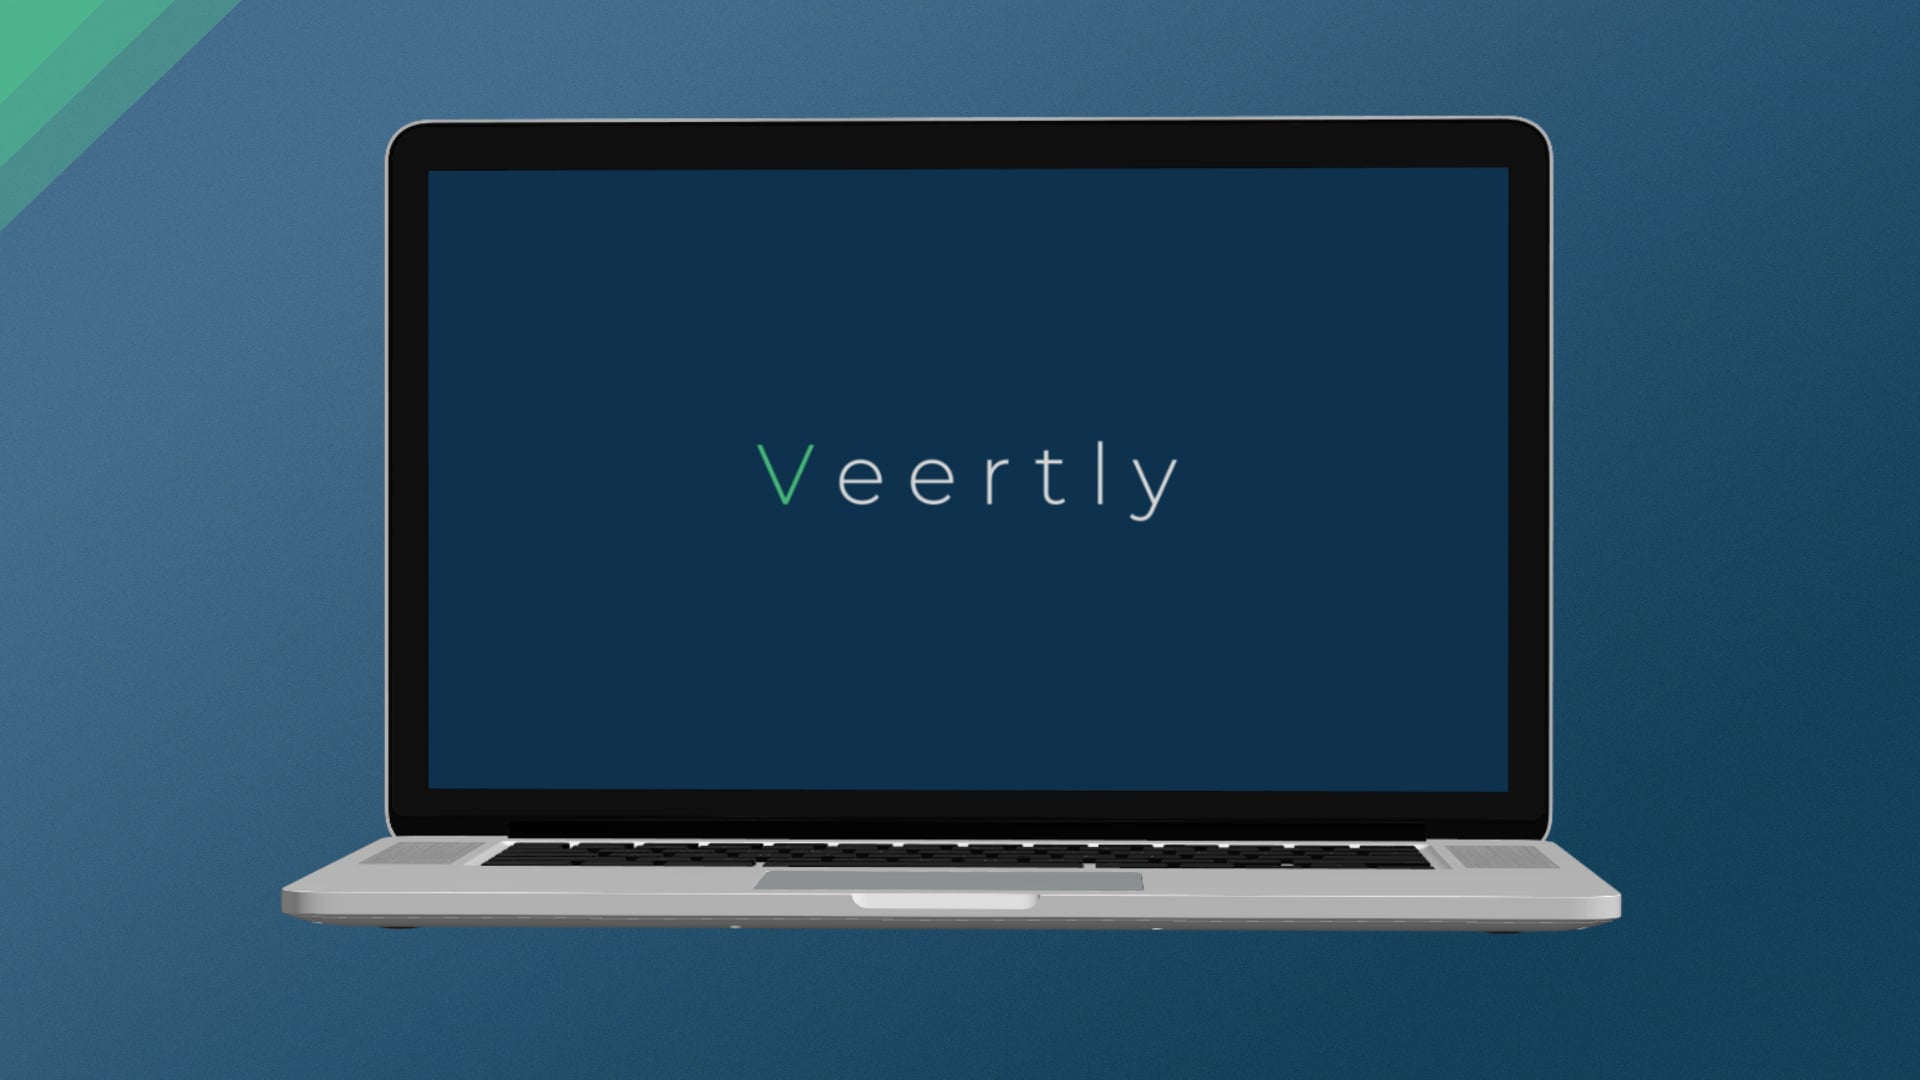 Veertly product demo explainer